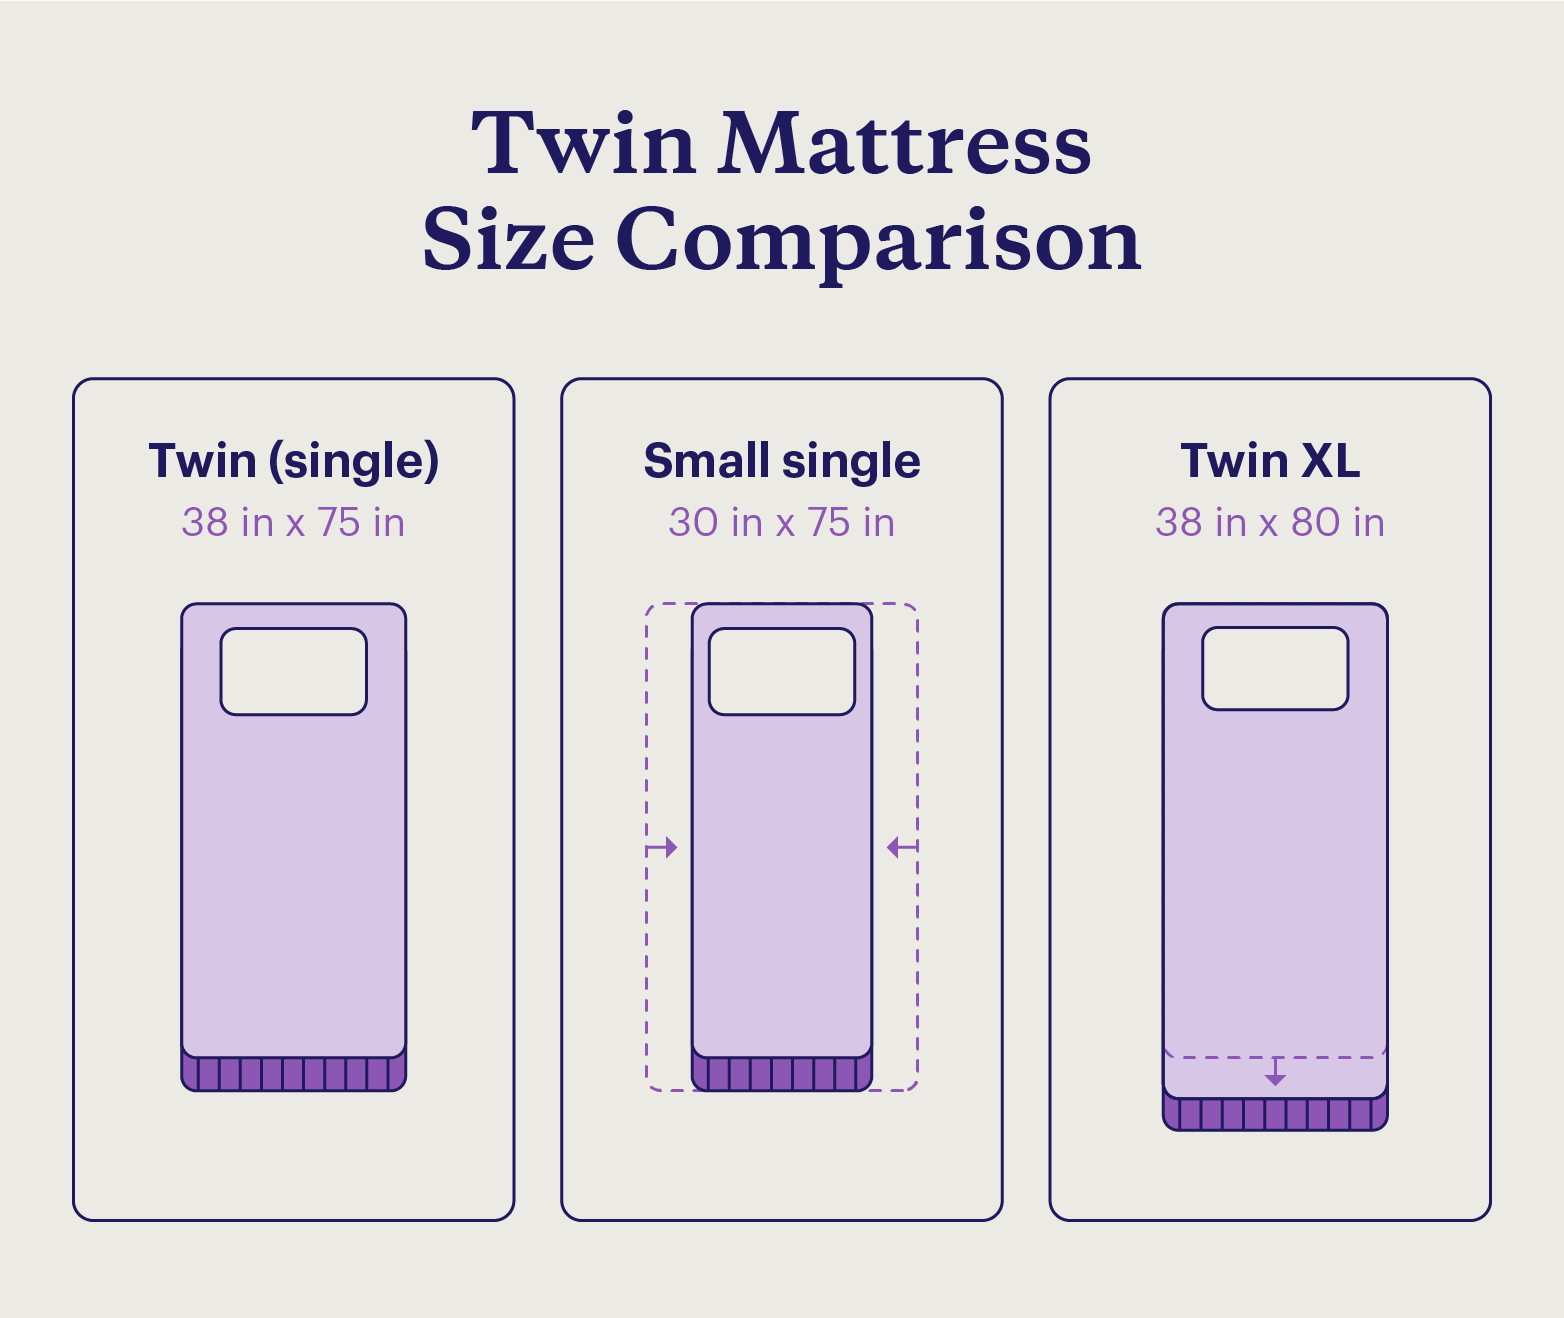 A comparison guide for different twin mattress sizes. 